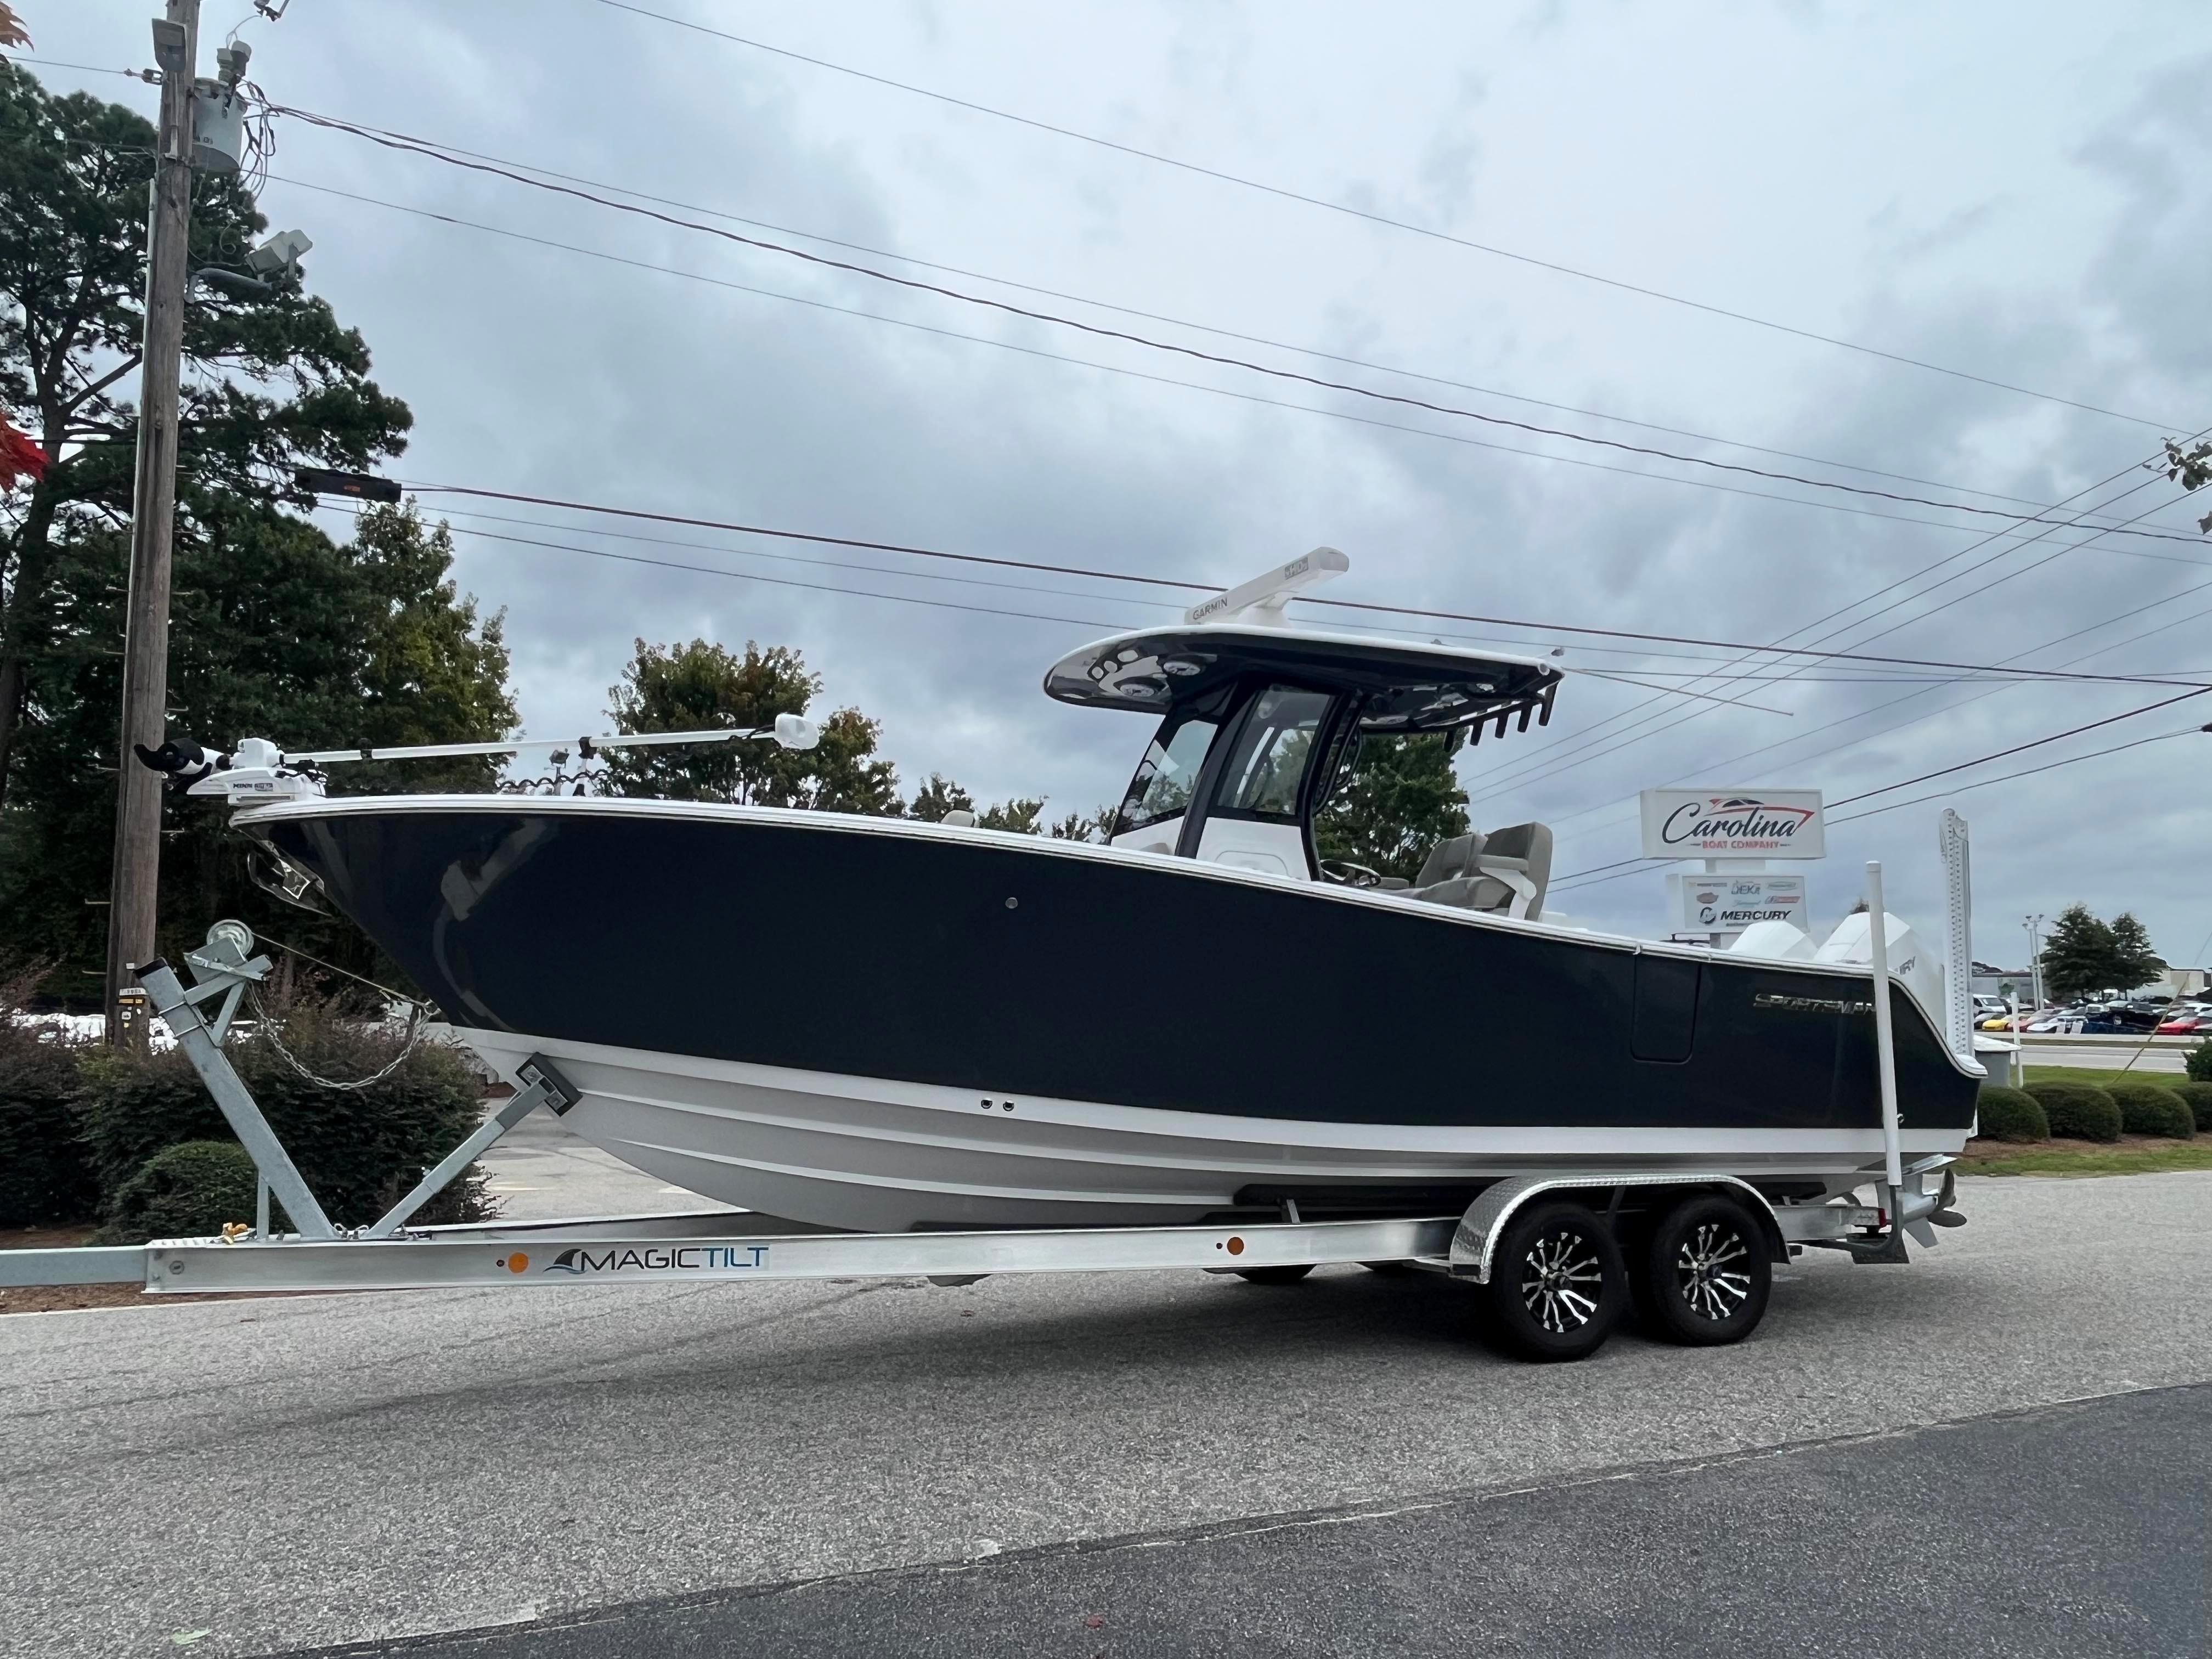 How to Install a New DIY Rub Rail on Your Boat - Florida Sportsman